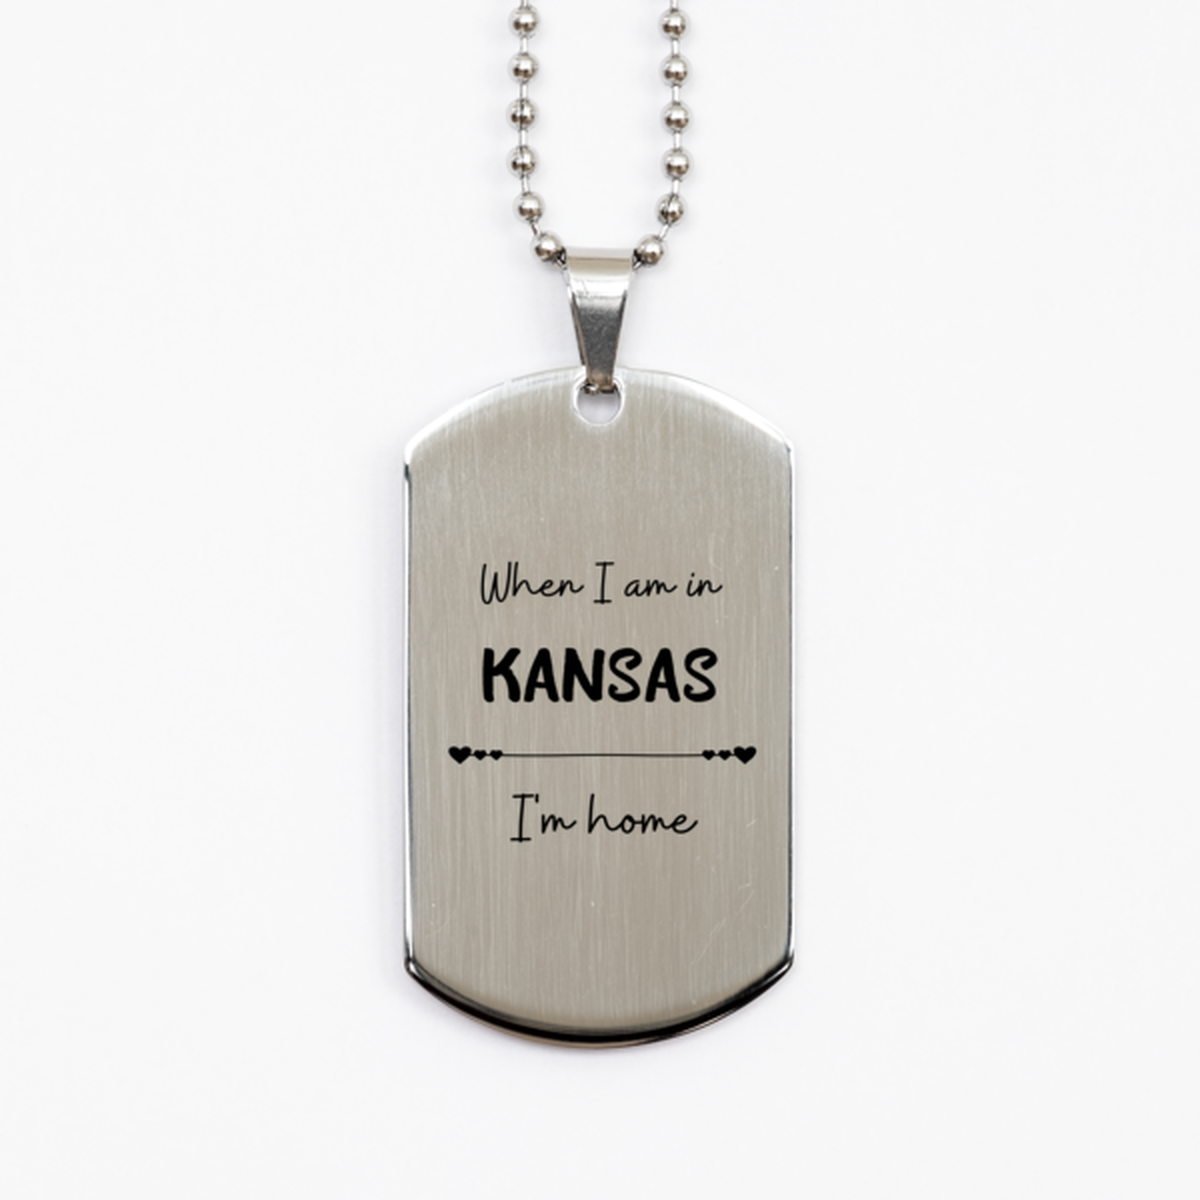 When I am in Kansas I'm home Silver Dog Tag, Cheap Gifts For Kansas, State Kansas Birthday Gifts for Friends Coworker